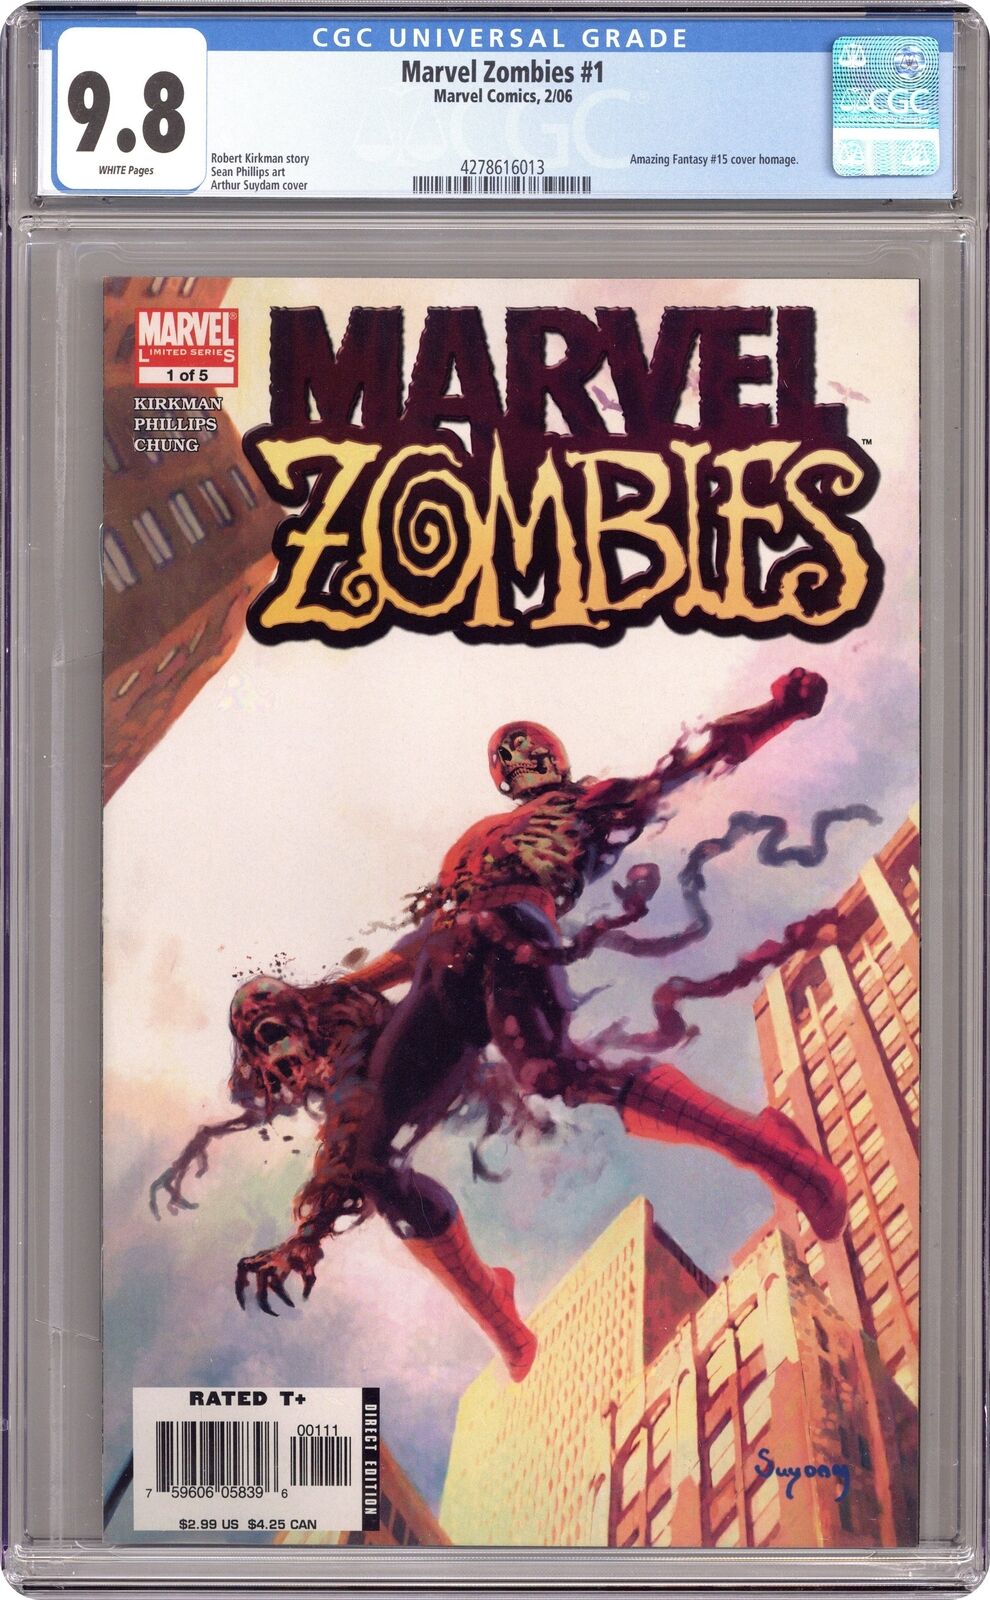 Marvel Zombies 1A 1st Printing CGC 9.8 2006 4278616013